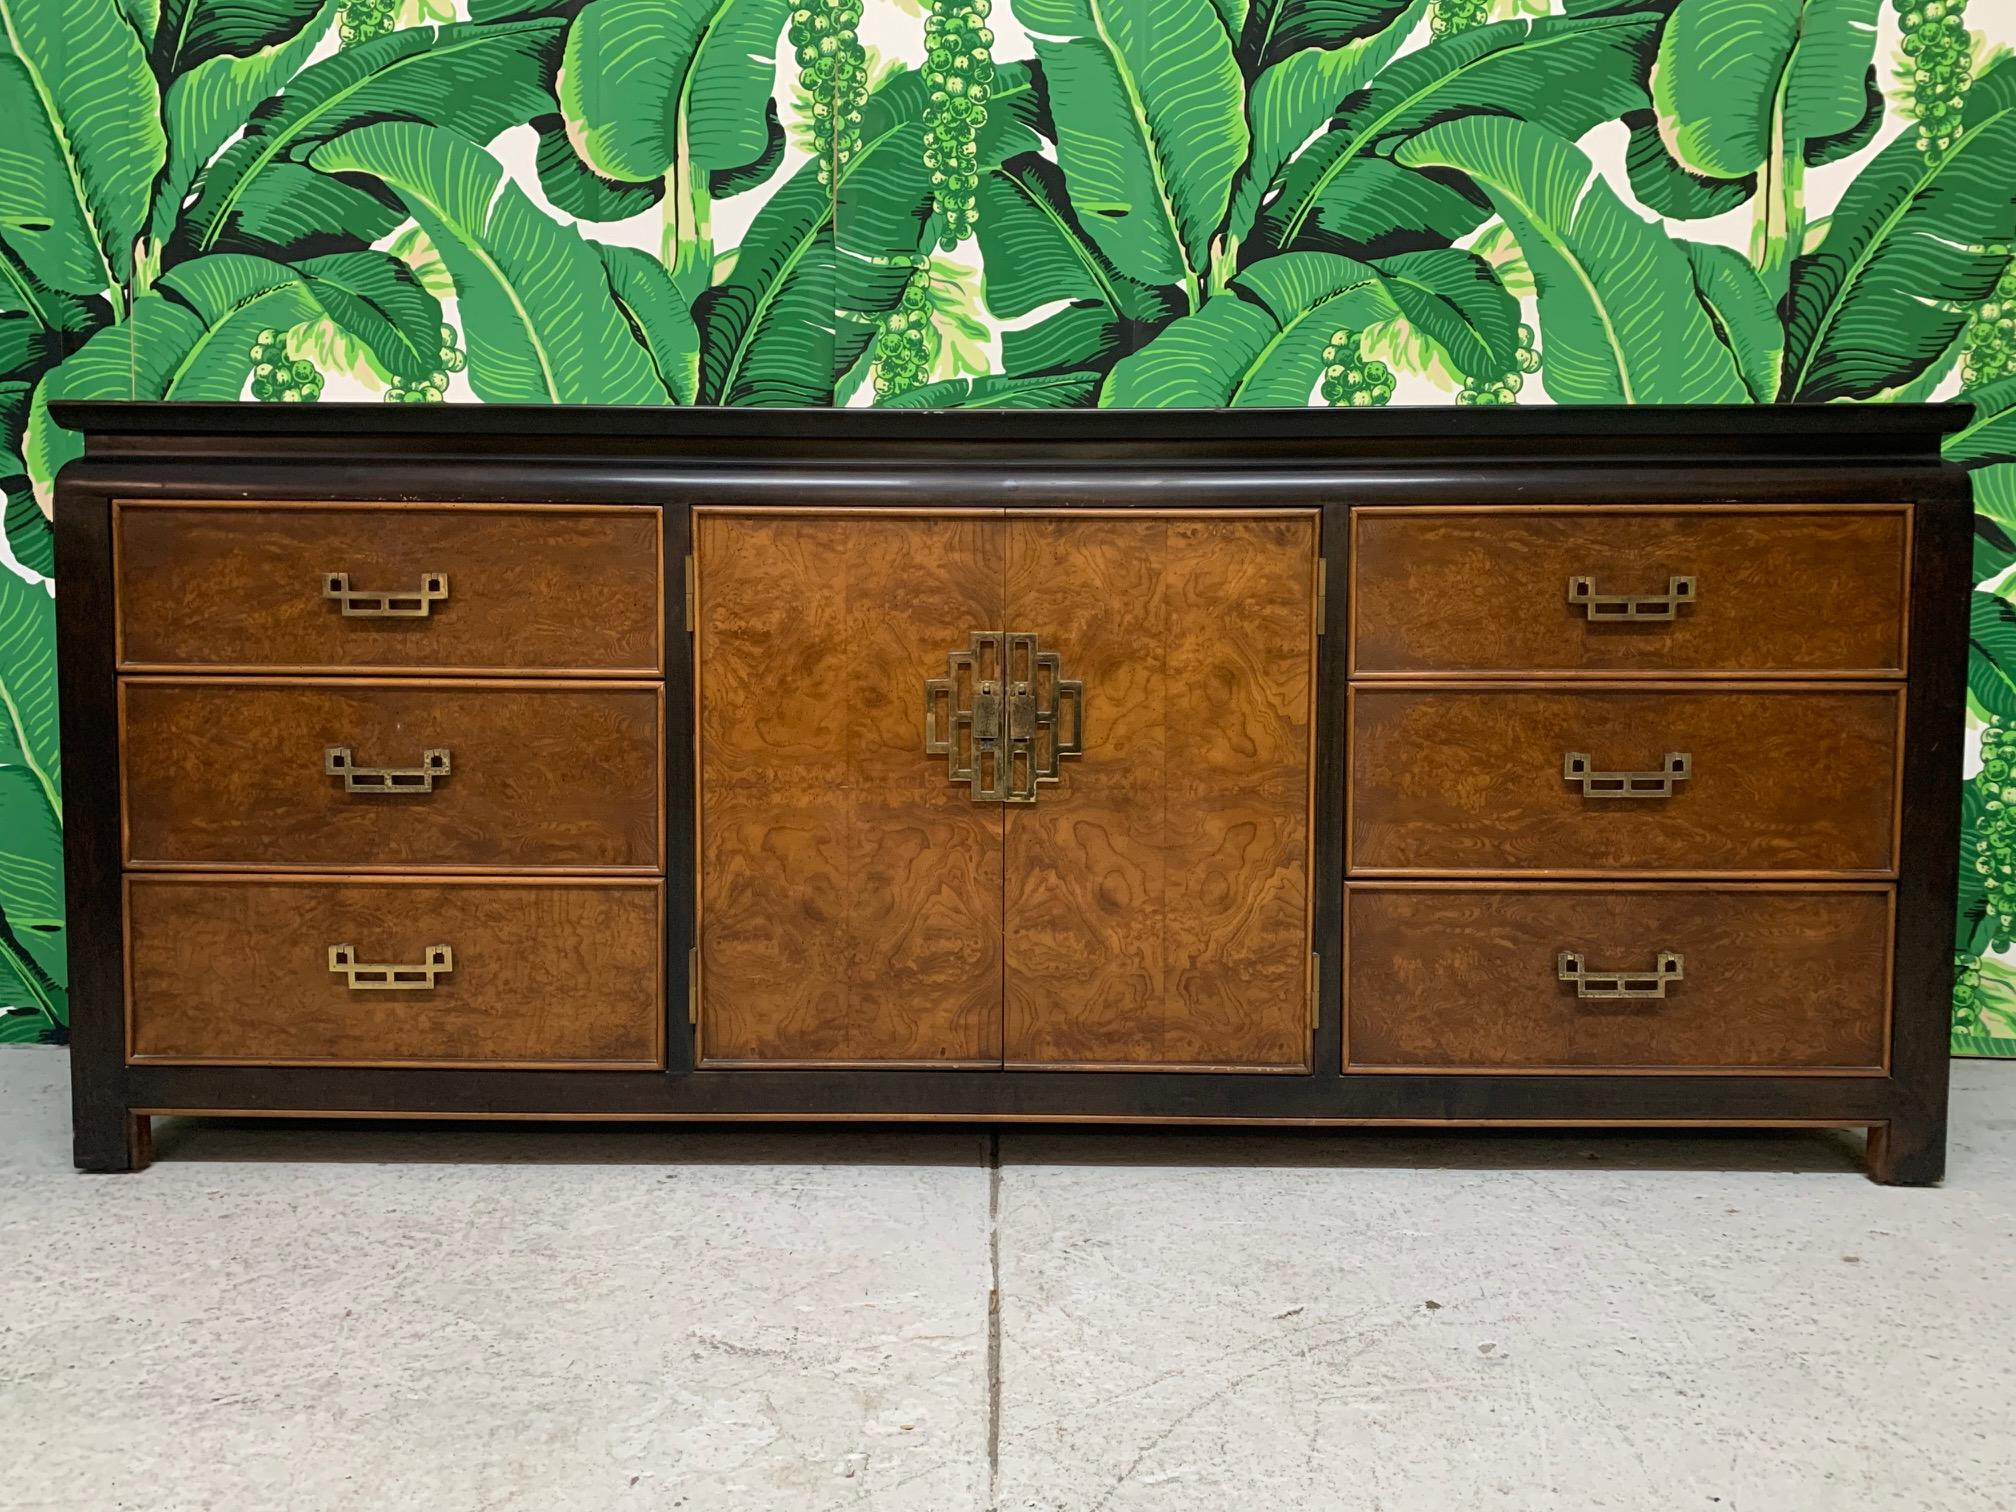 Two-toned dresser by Century Furniture features burl fronts and brass hardware in Asian chinoiserie style. Very good condition with only minor imperfections consistent with age.